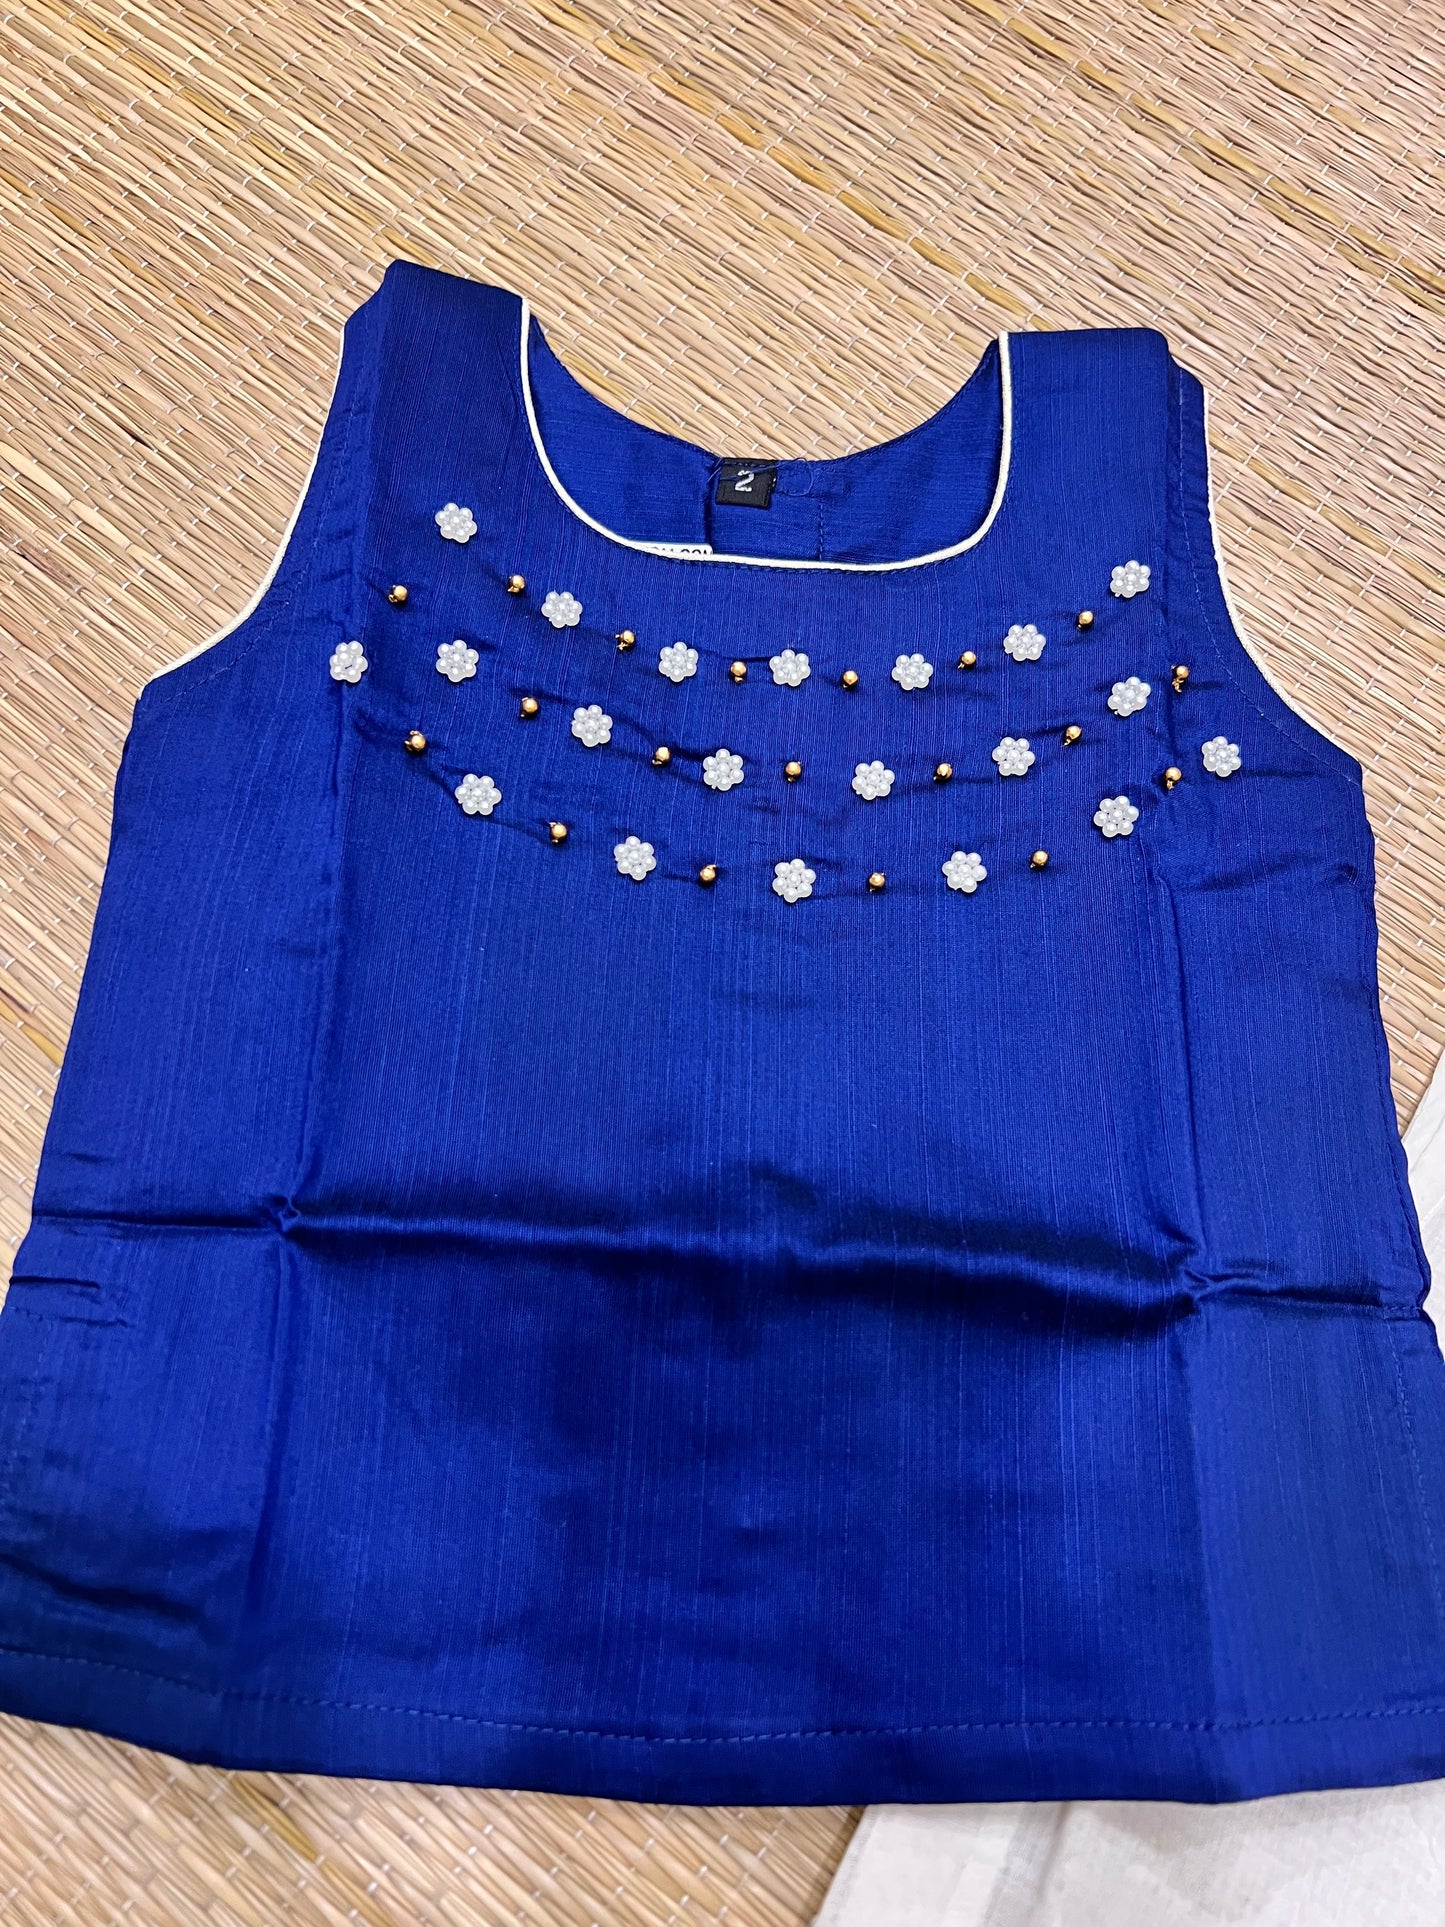 Southloom Kerala Pavada Blouse with Blue Bead Work Design